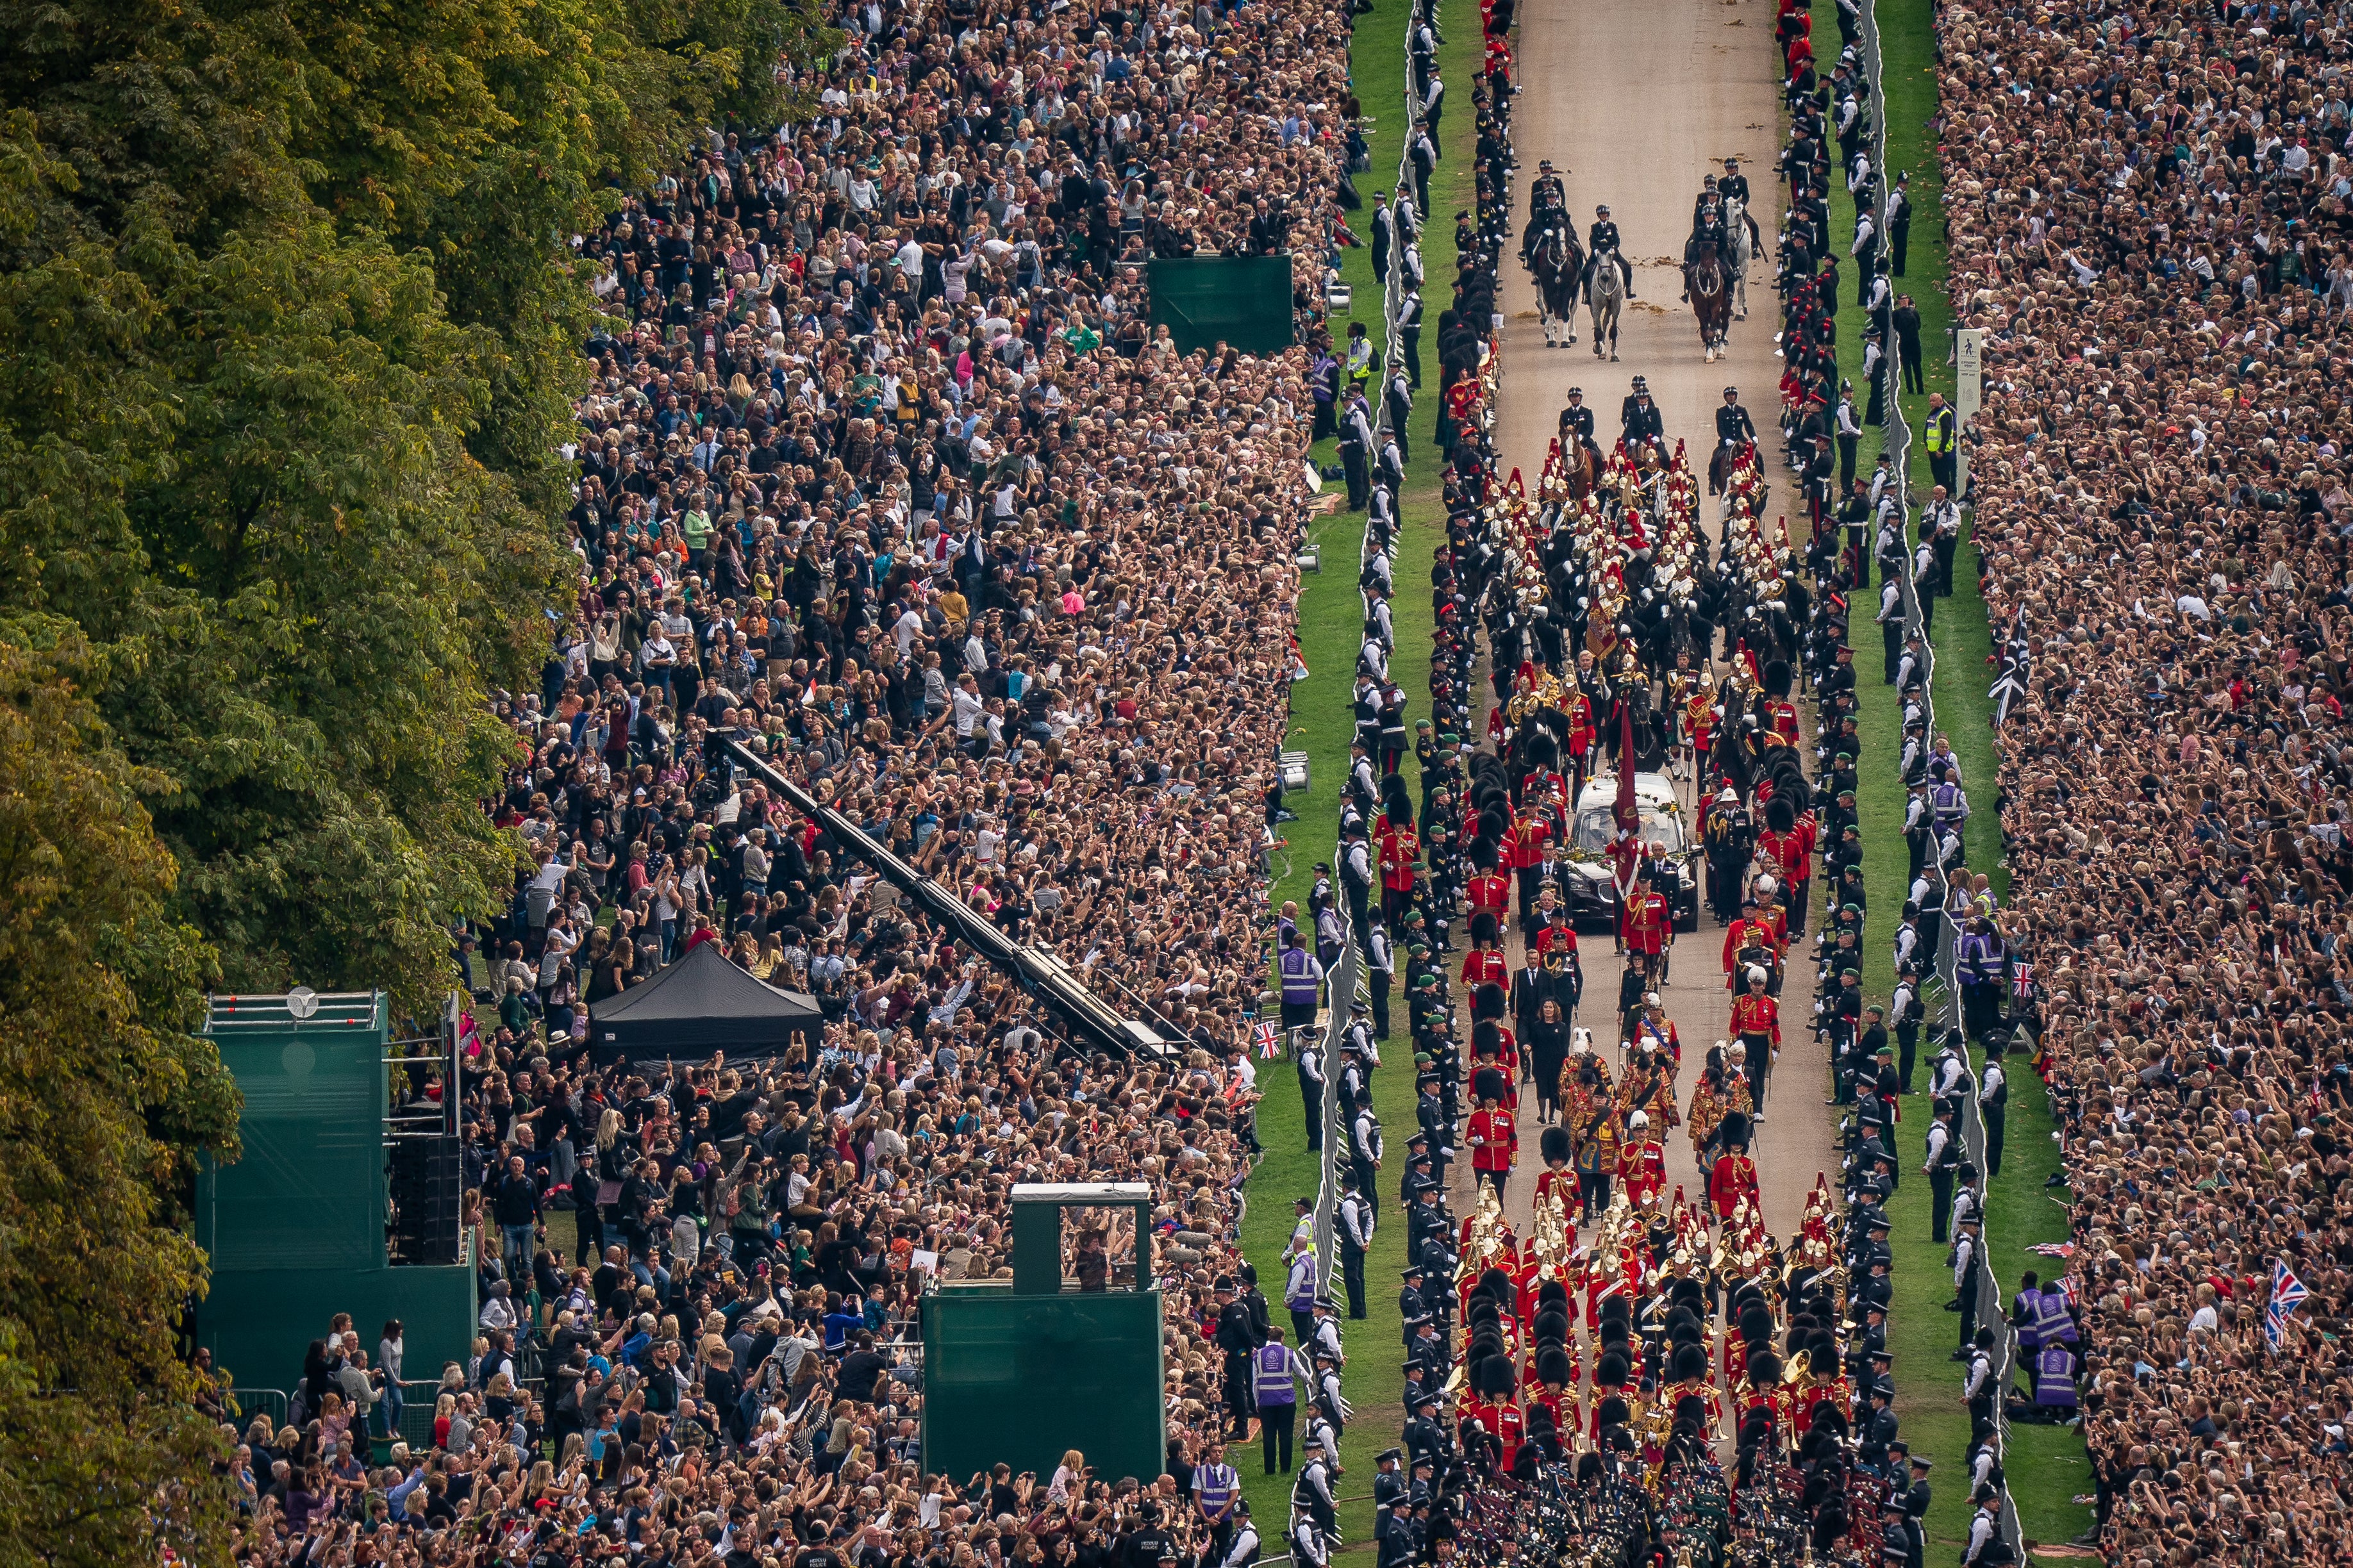 The Ceremonial Procession of the coffin of Queen Elizabeth II travels down the Long Walk as it arrives at Windsor Castle for the Committal Service at St George’s Chapel